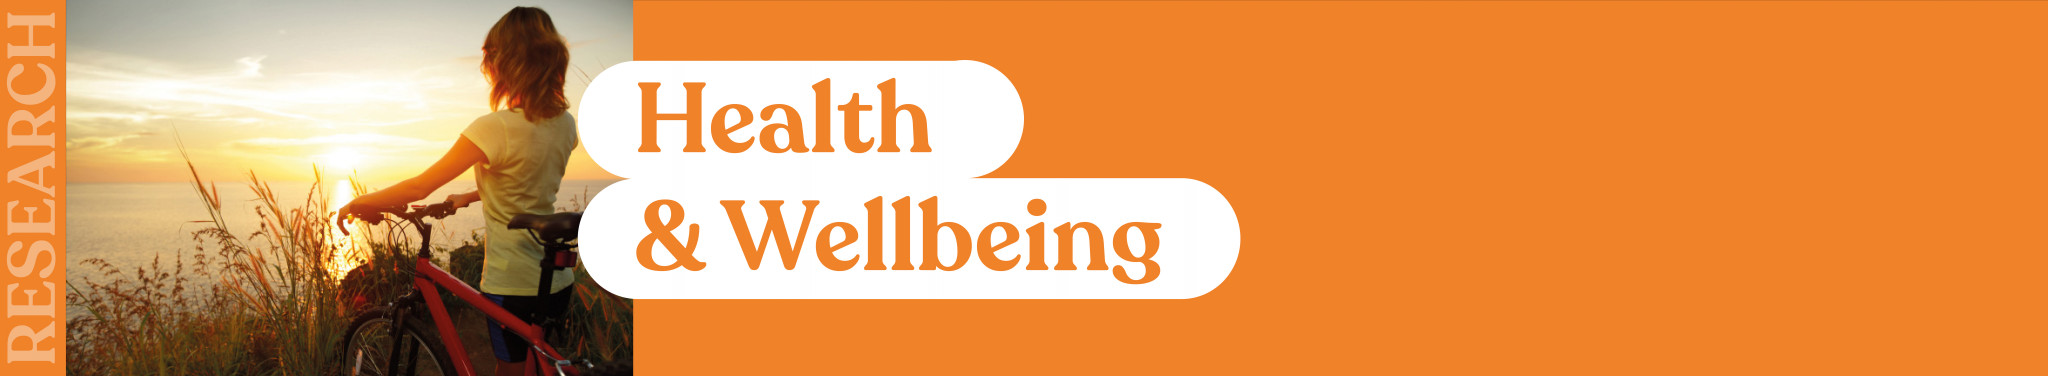 Health and Wellbeing banner